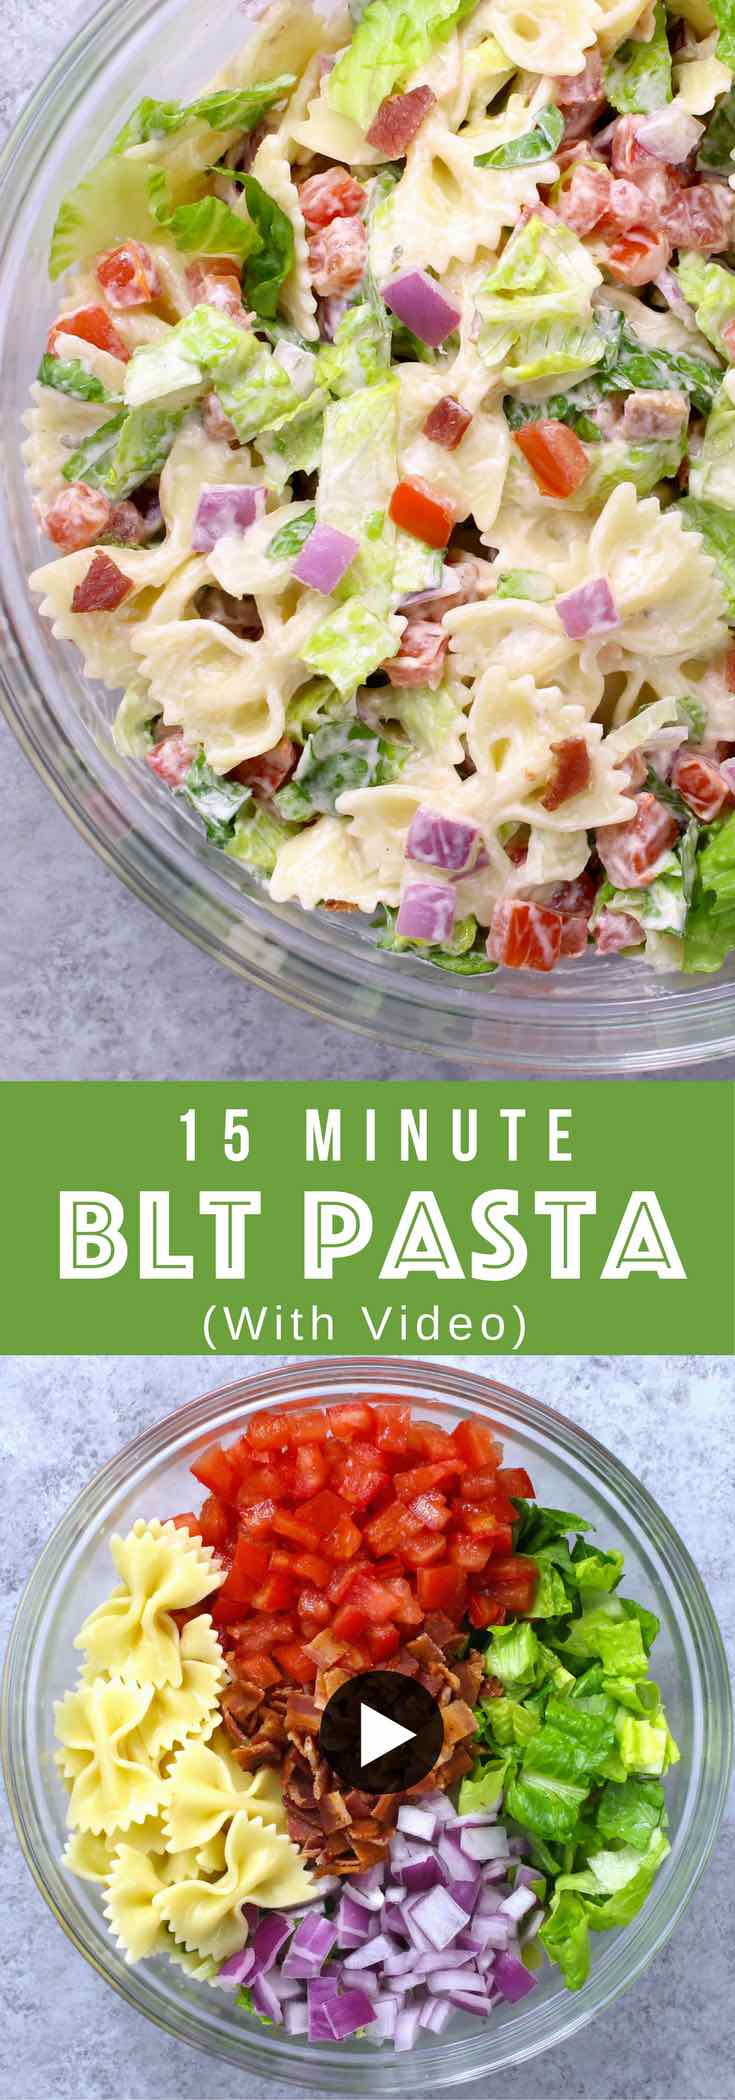 Easy BLT Pasta Salad – Ready in 15 minutes and a guaranteed hit with the pasta and vegetables coated in creamy dressing. All you need is some simple ingredients: Farfalle pasta, lettuce, tomatoes, red onion, mayonnaise, ranch dressing, yogurt and pepper. So yummy! Perfect for a summer time party or a picnic. Quick and easy recipe. Lunch or side dish. Video recipe. Tipbuzz.com